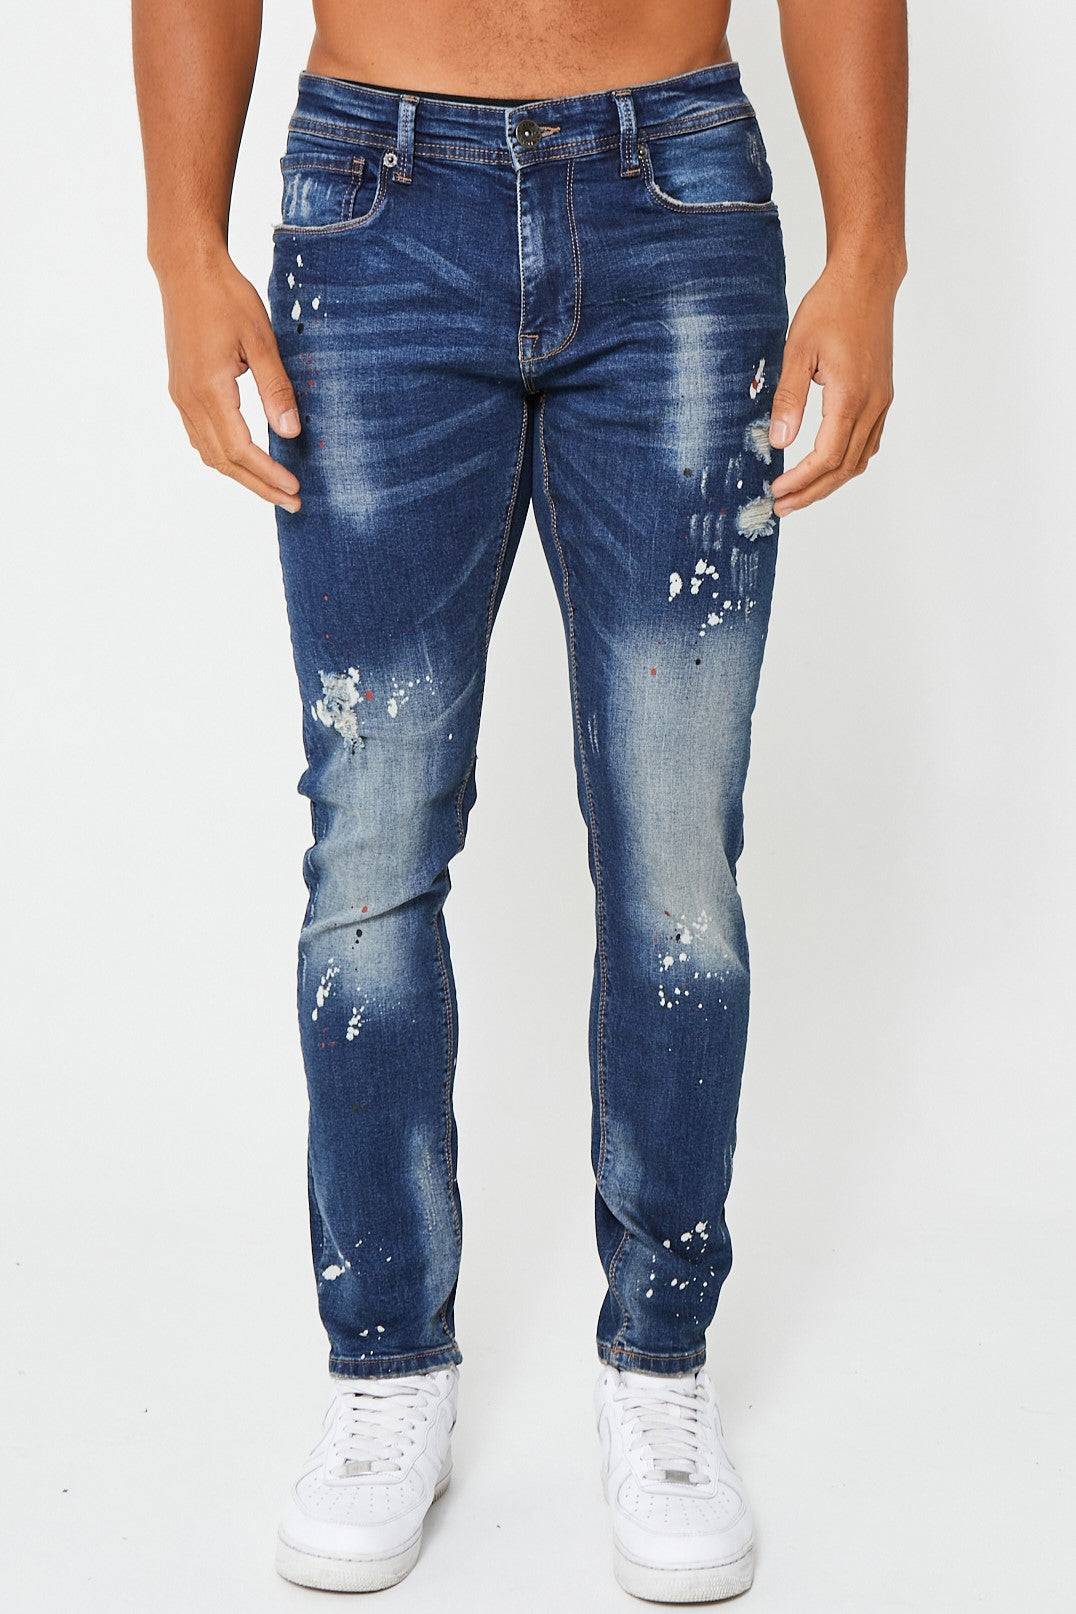 Hainault Tapered Jean - Mid Blue product